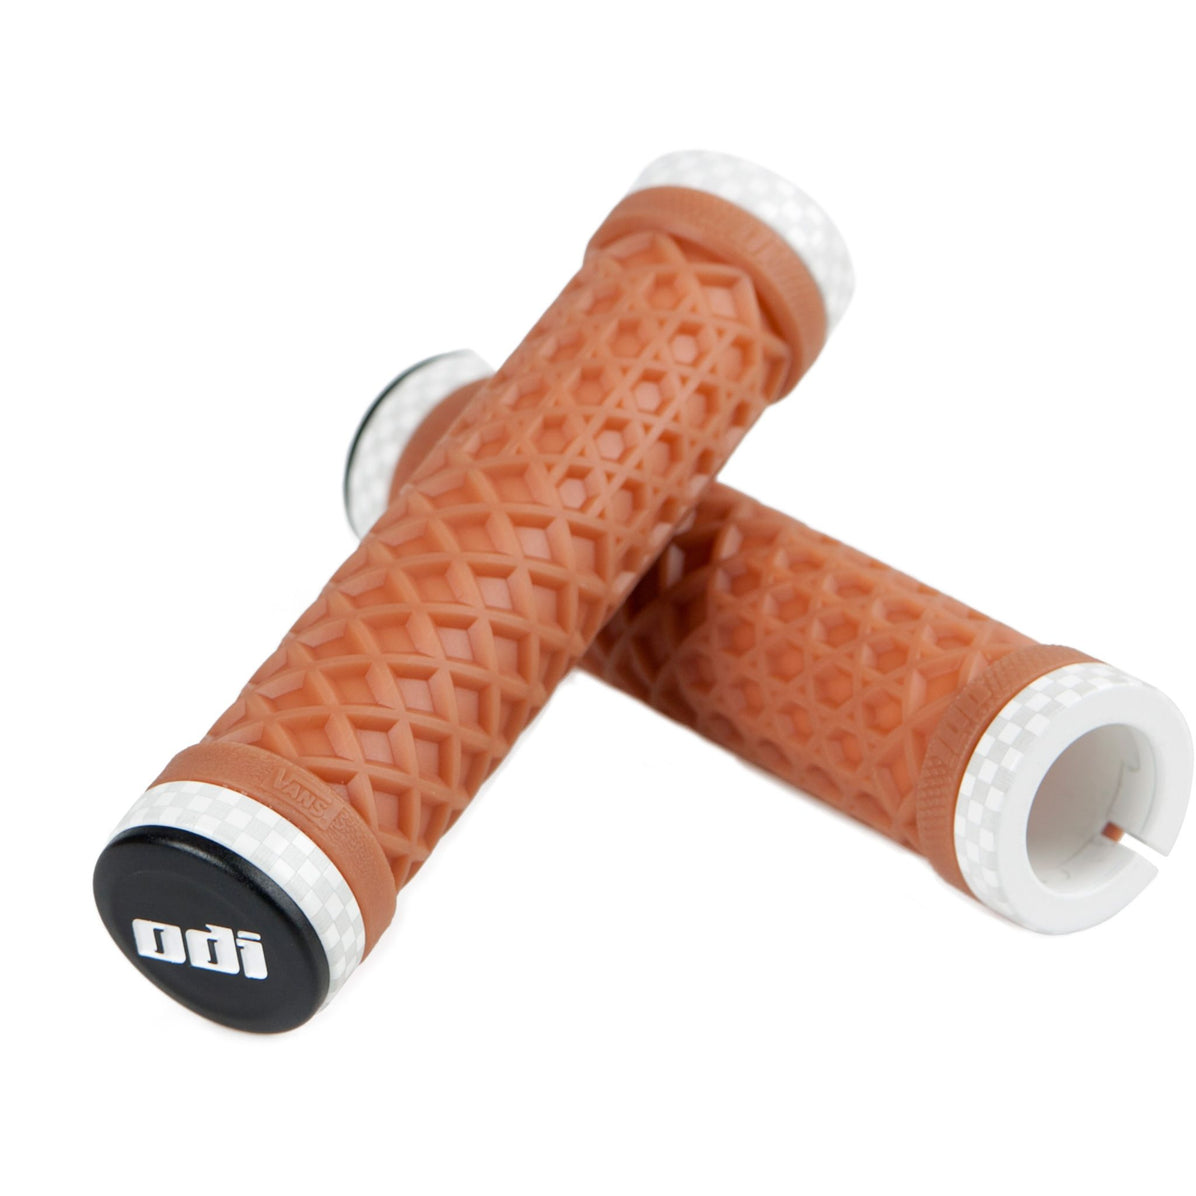 ODI Vans Limited Edition Lock On Grips